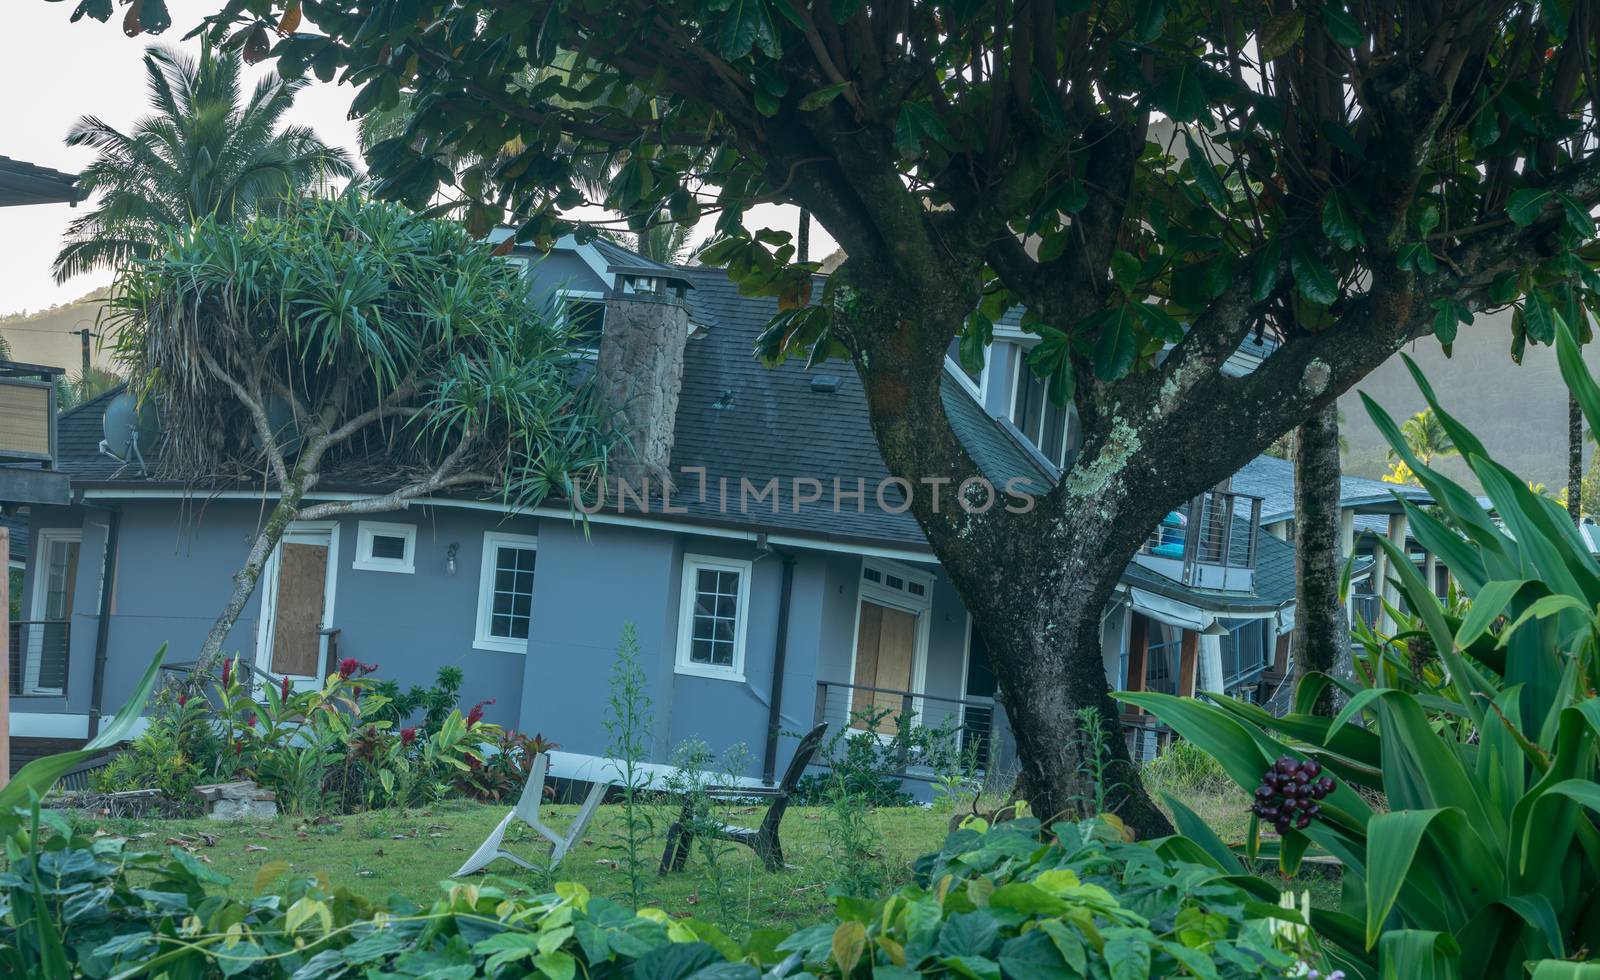 Beach houses collapsed after heavy rain in April 2018 in Hanalei by steheap